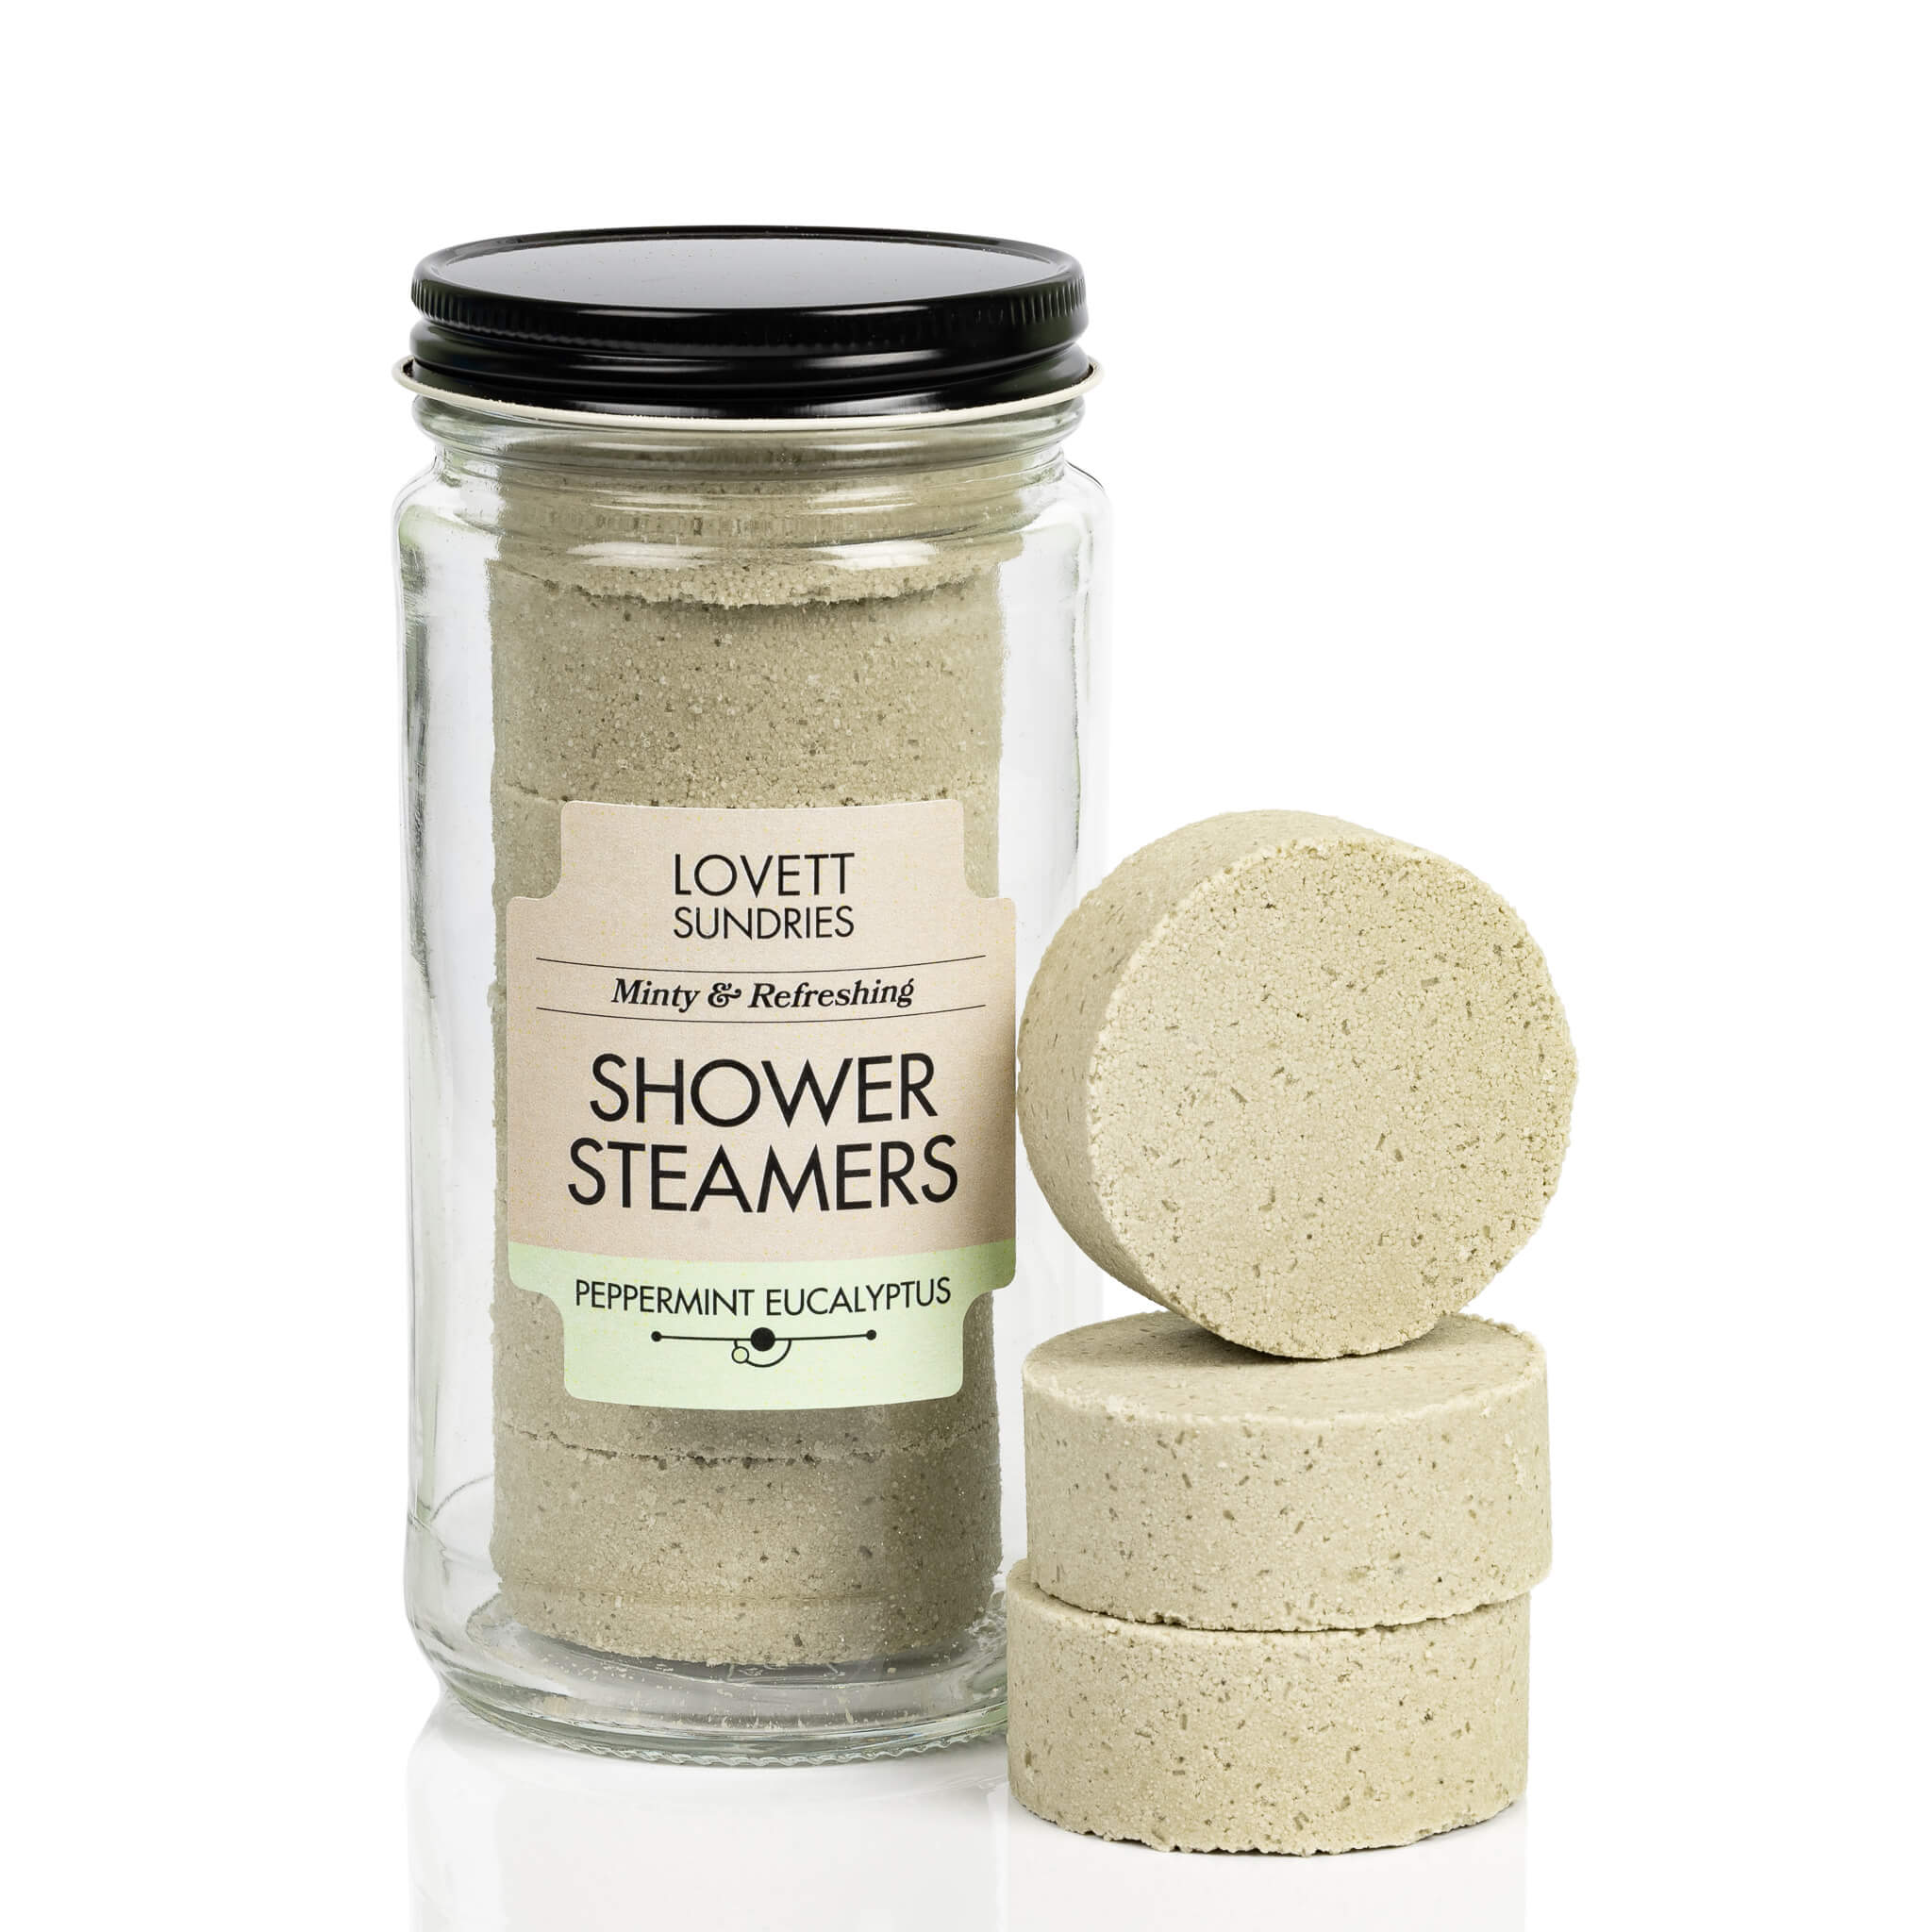 Recyclable glass jar filled with 6 peppermint eucalyptus scented all natural shower steamers.